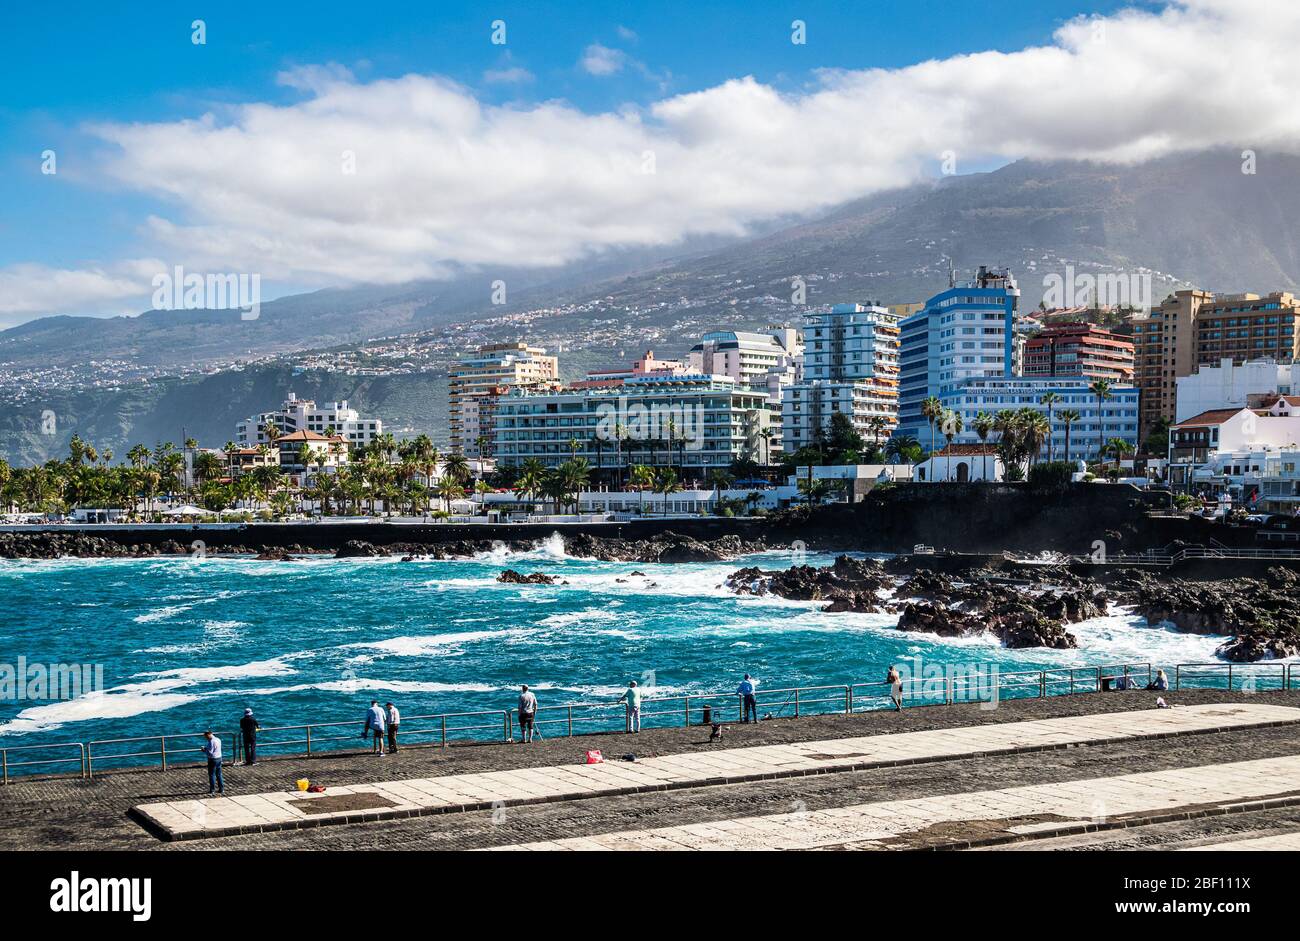 Locals fishing and watching giant waves crashing the shore of the port area on Puerto de la Cruz as the calima mist descends from mount Teide. Stock Photo